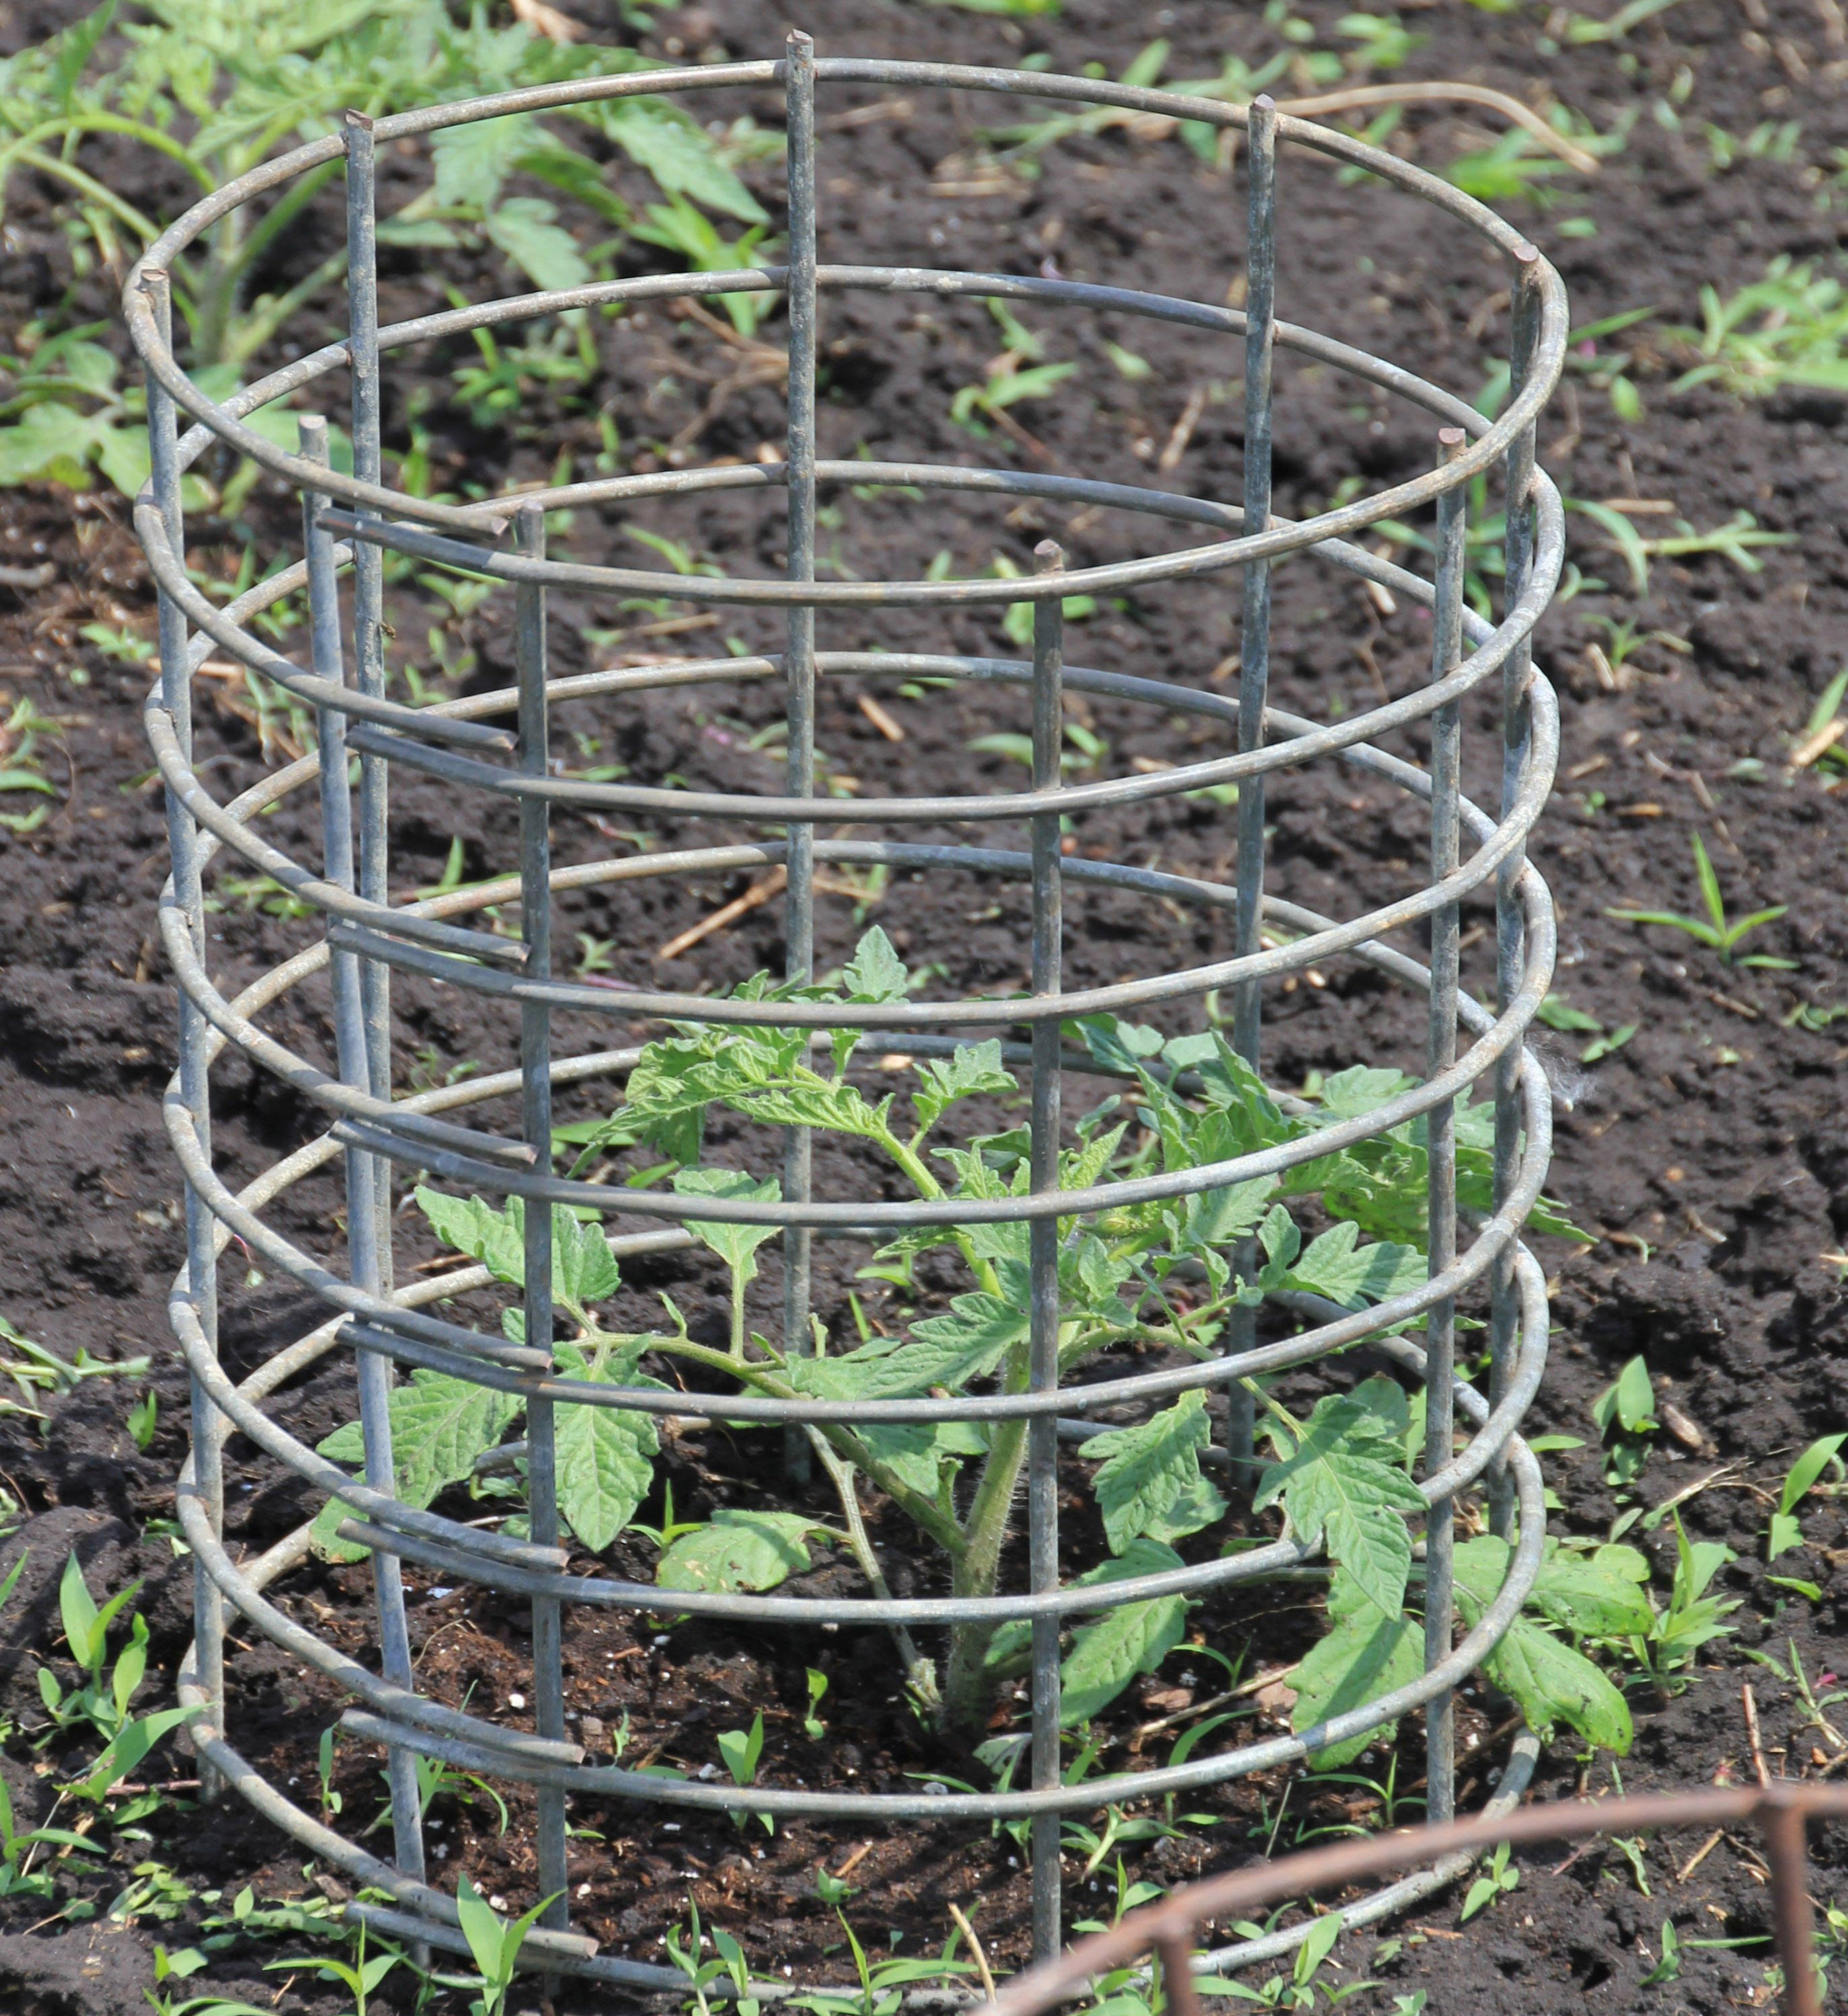 tomato plant growing from inside a round metal cage